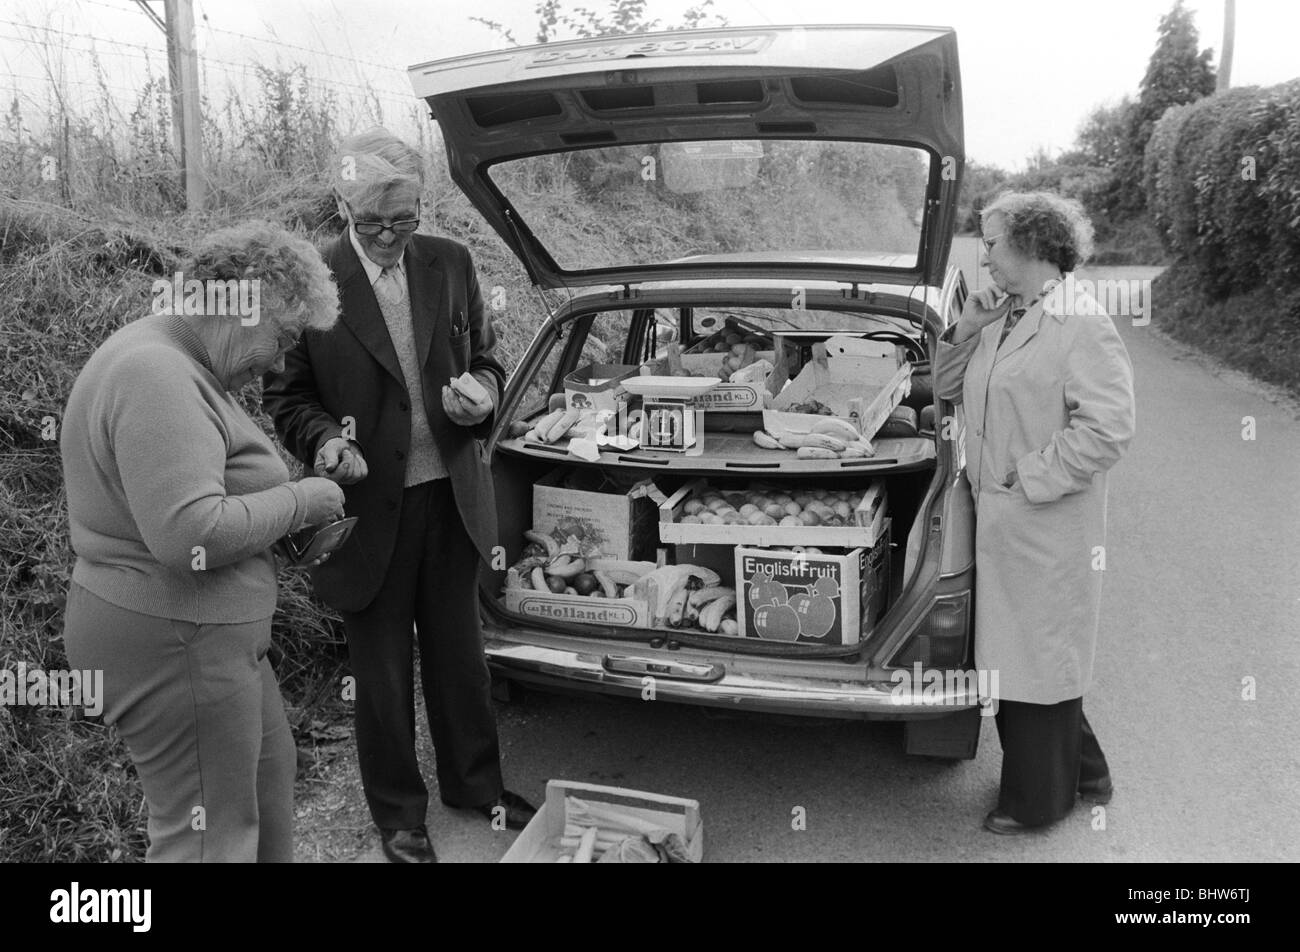 Mobile shop 1980s UK. The local Methodist lay preacher deliveries pre-ordered groceries once a week from the back of his car. The village shop had recently closed down.1980s Britain rural community grocery shopping Upper Basildon Berkshire England  1983  1980s  UK HOMER SYKES Stock Photo